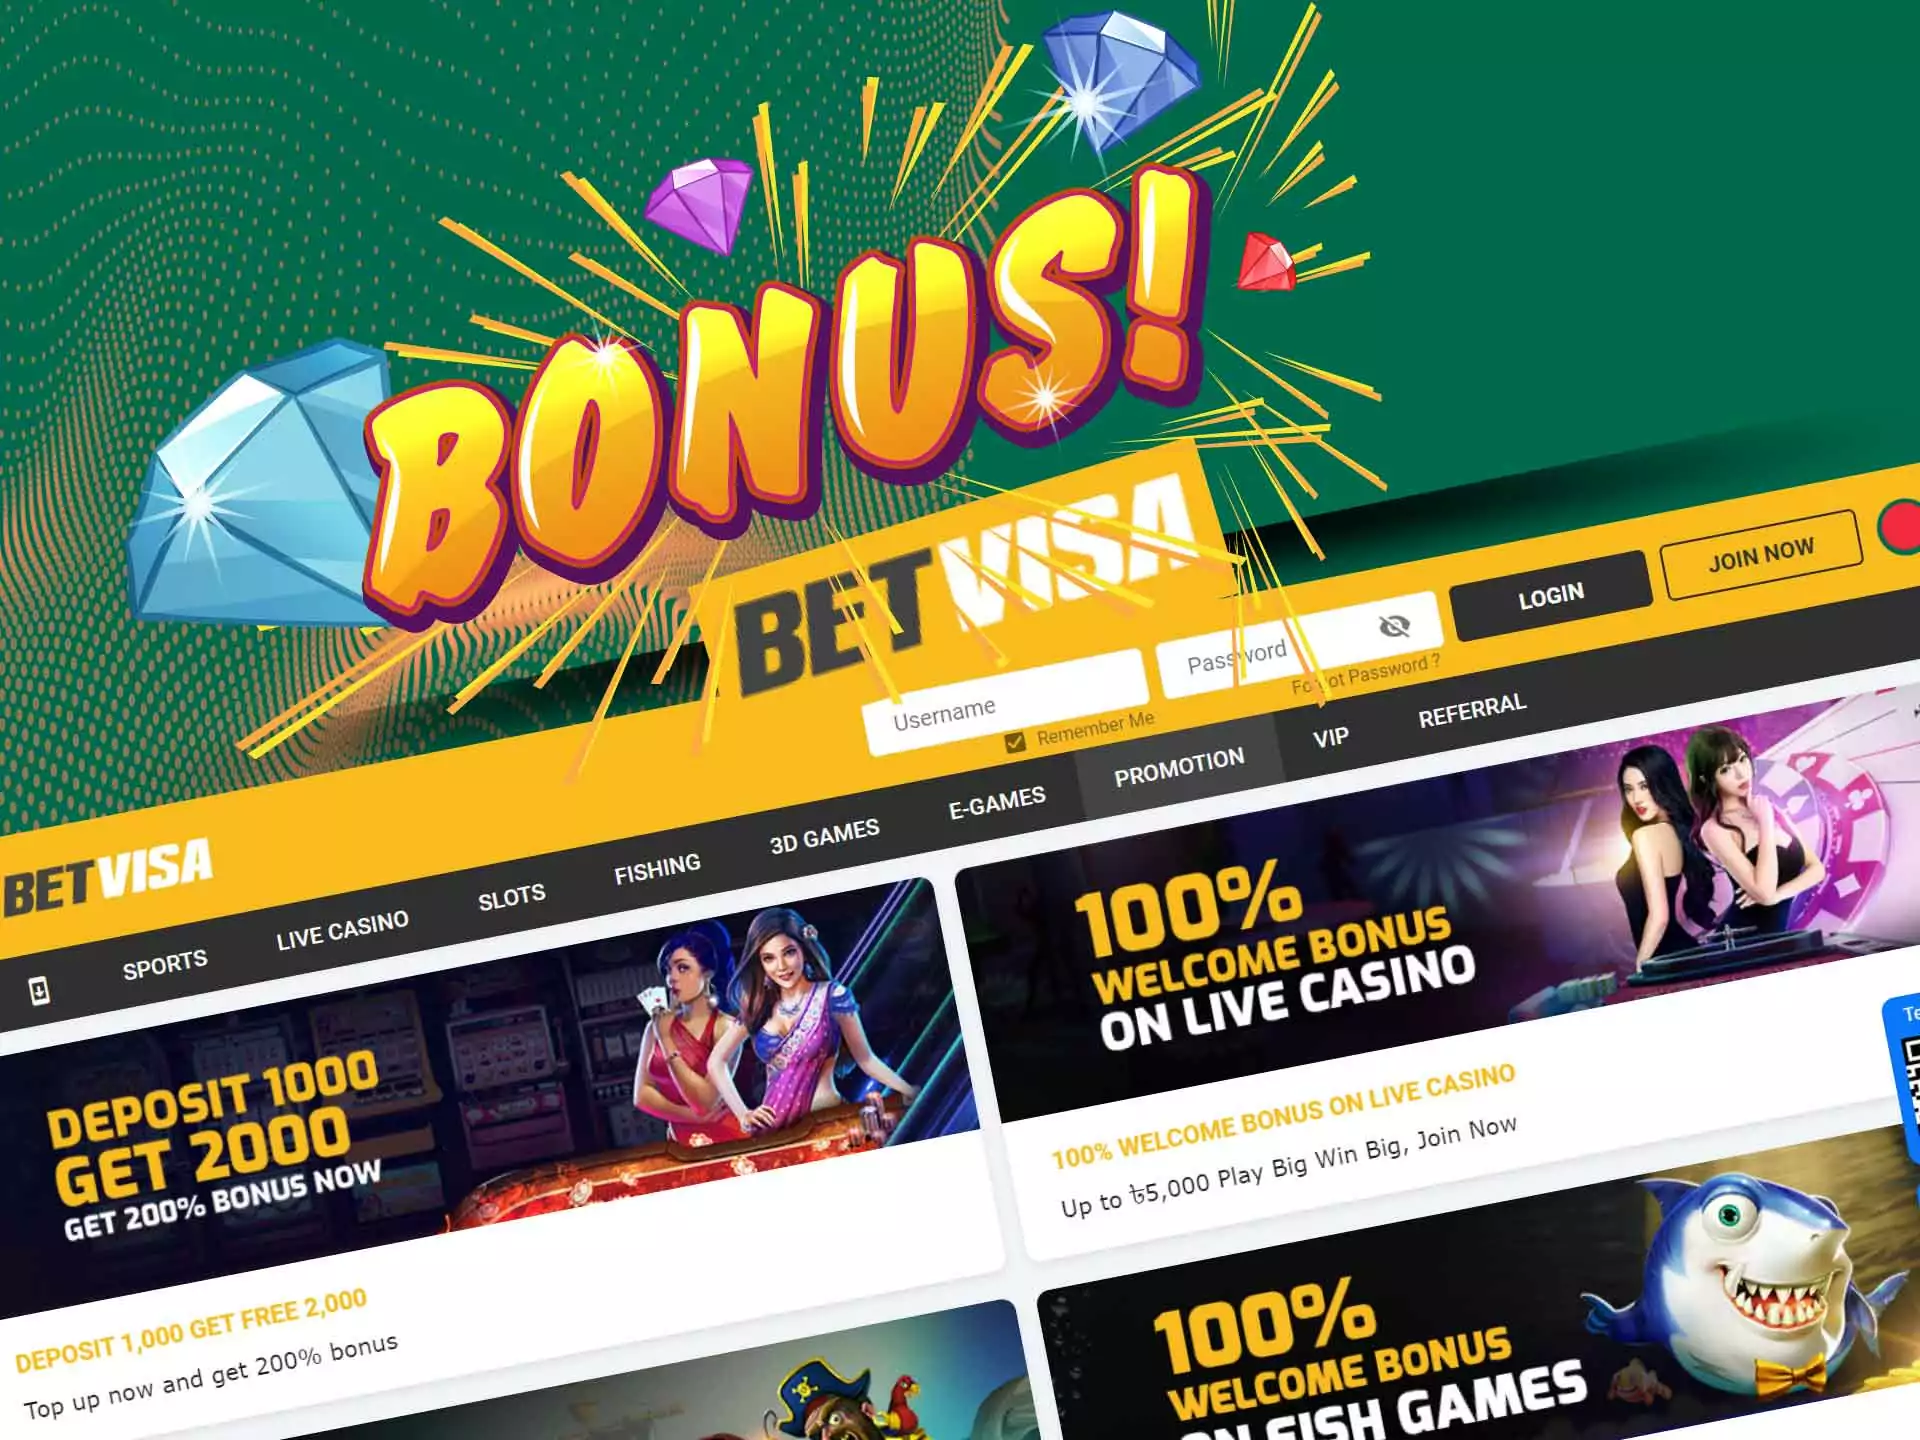 You will find various lucrative bonuses at BetVisa.